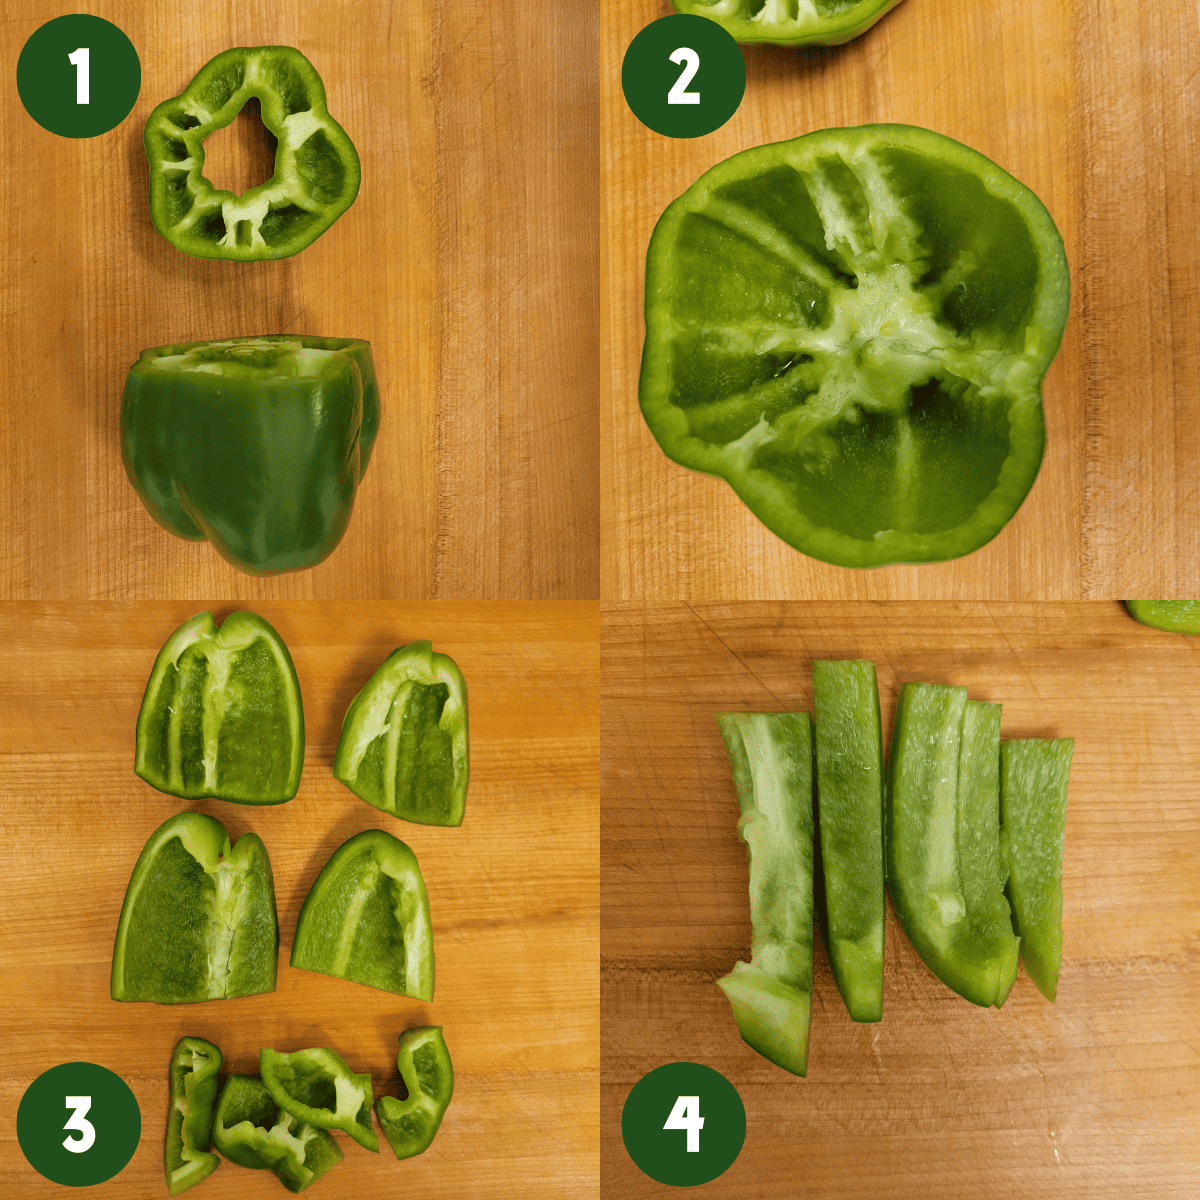 Step 1) The top cut off a green bell pepper. Step 2) A close up of the green pepper without seeds. Step 3) The top of the green pepper is sliced in 4 pieces and the bell pepper bottom is sliced into quarters. Step 4) Green bell pepper cut into slices on a wooden cutting board.